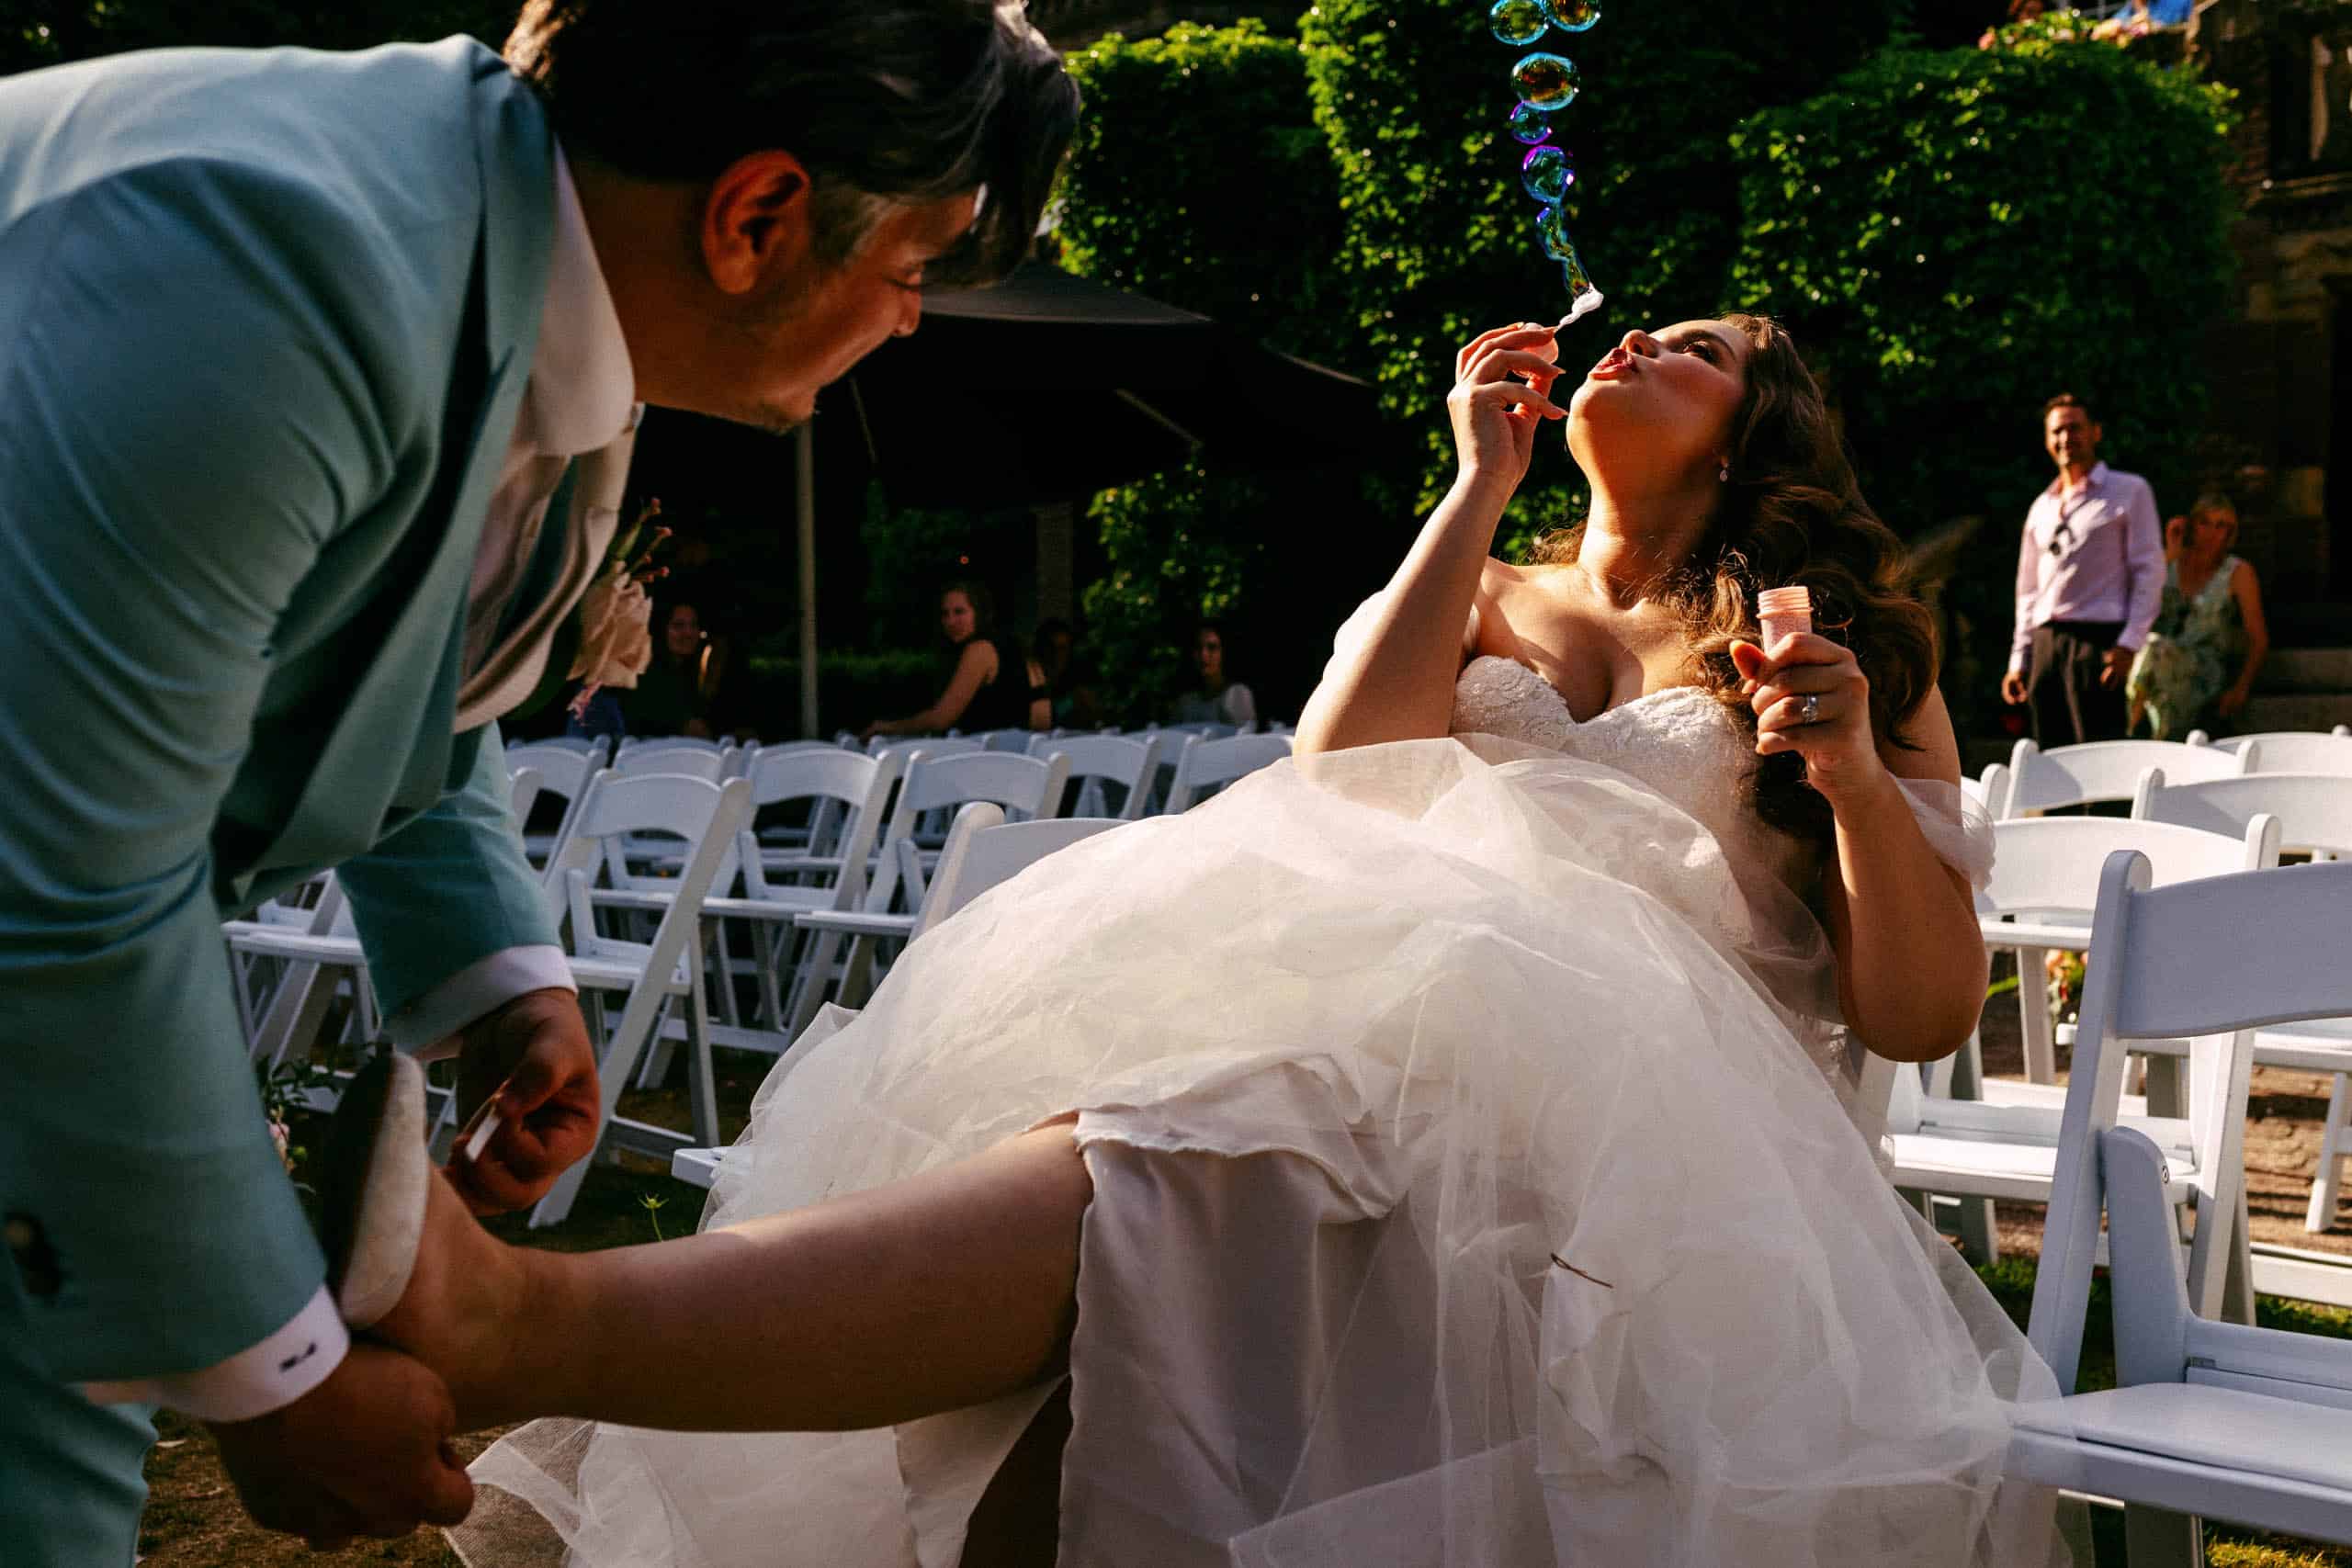 A script example of a wedding ceremony capturing the magical moment when a bride and groom blow bubbles.